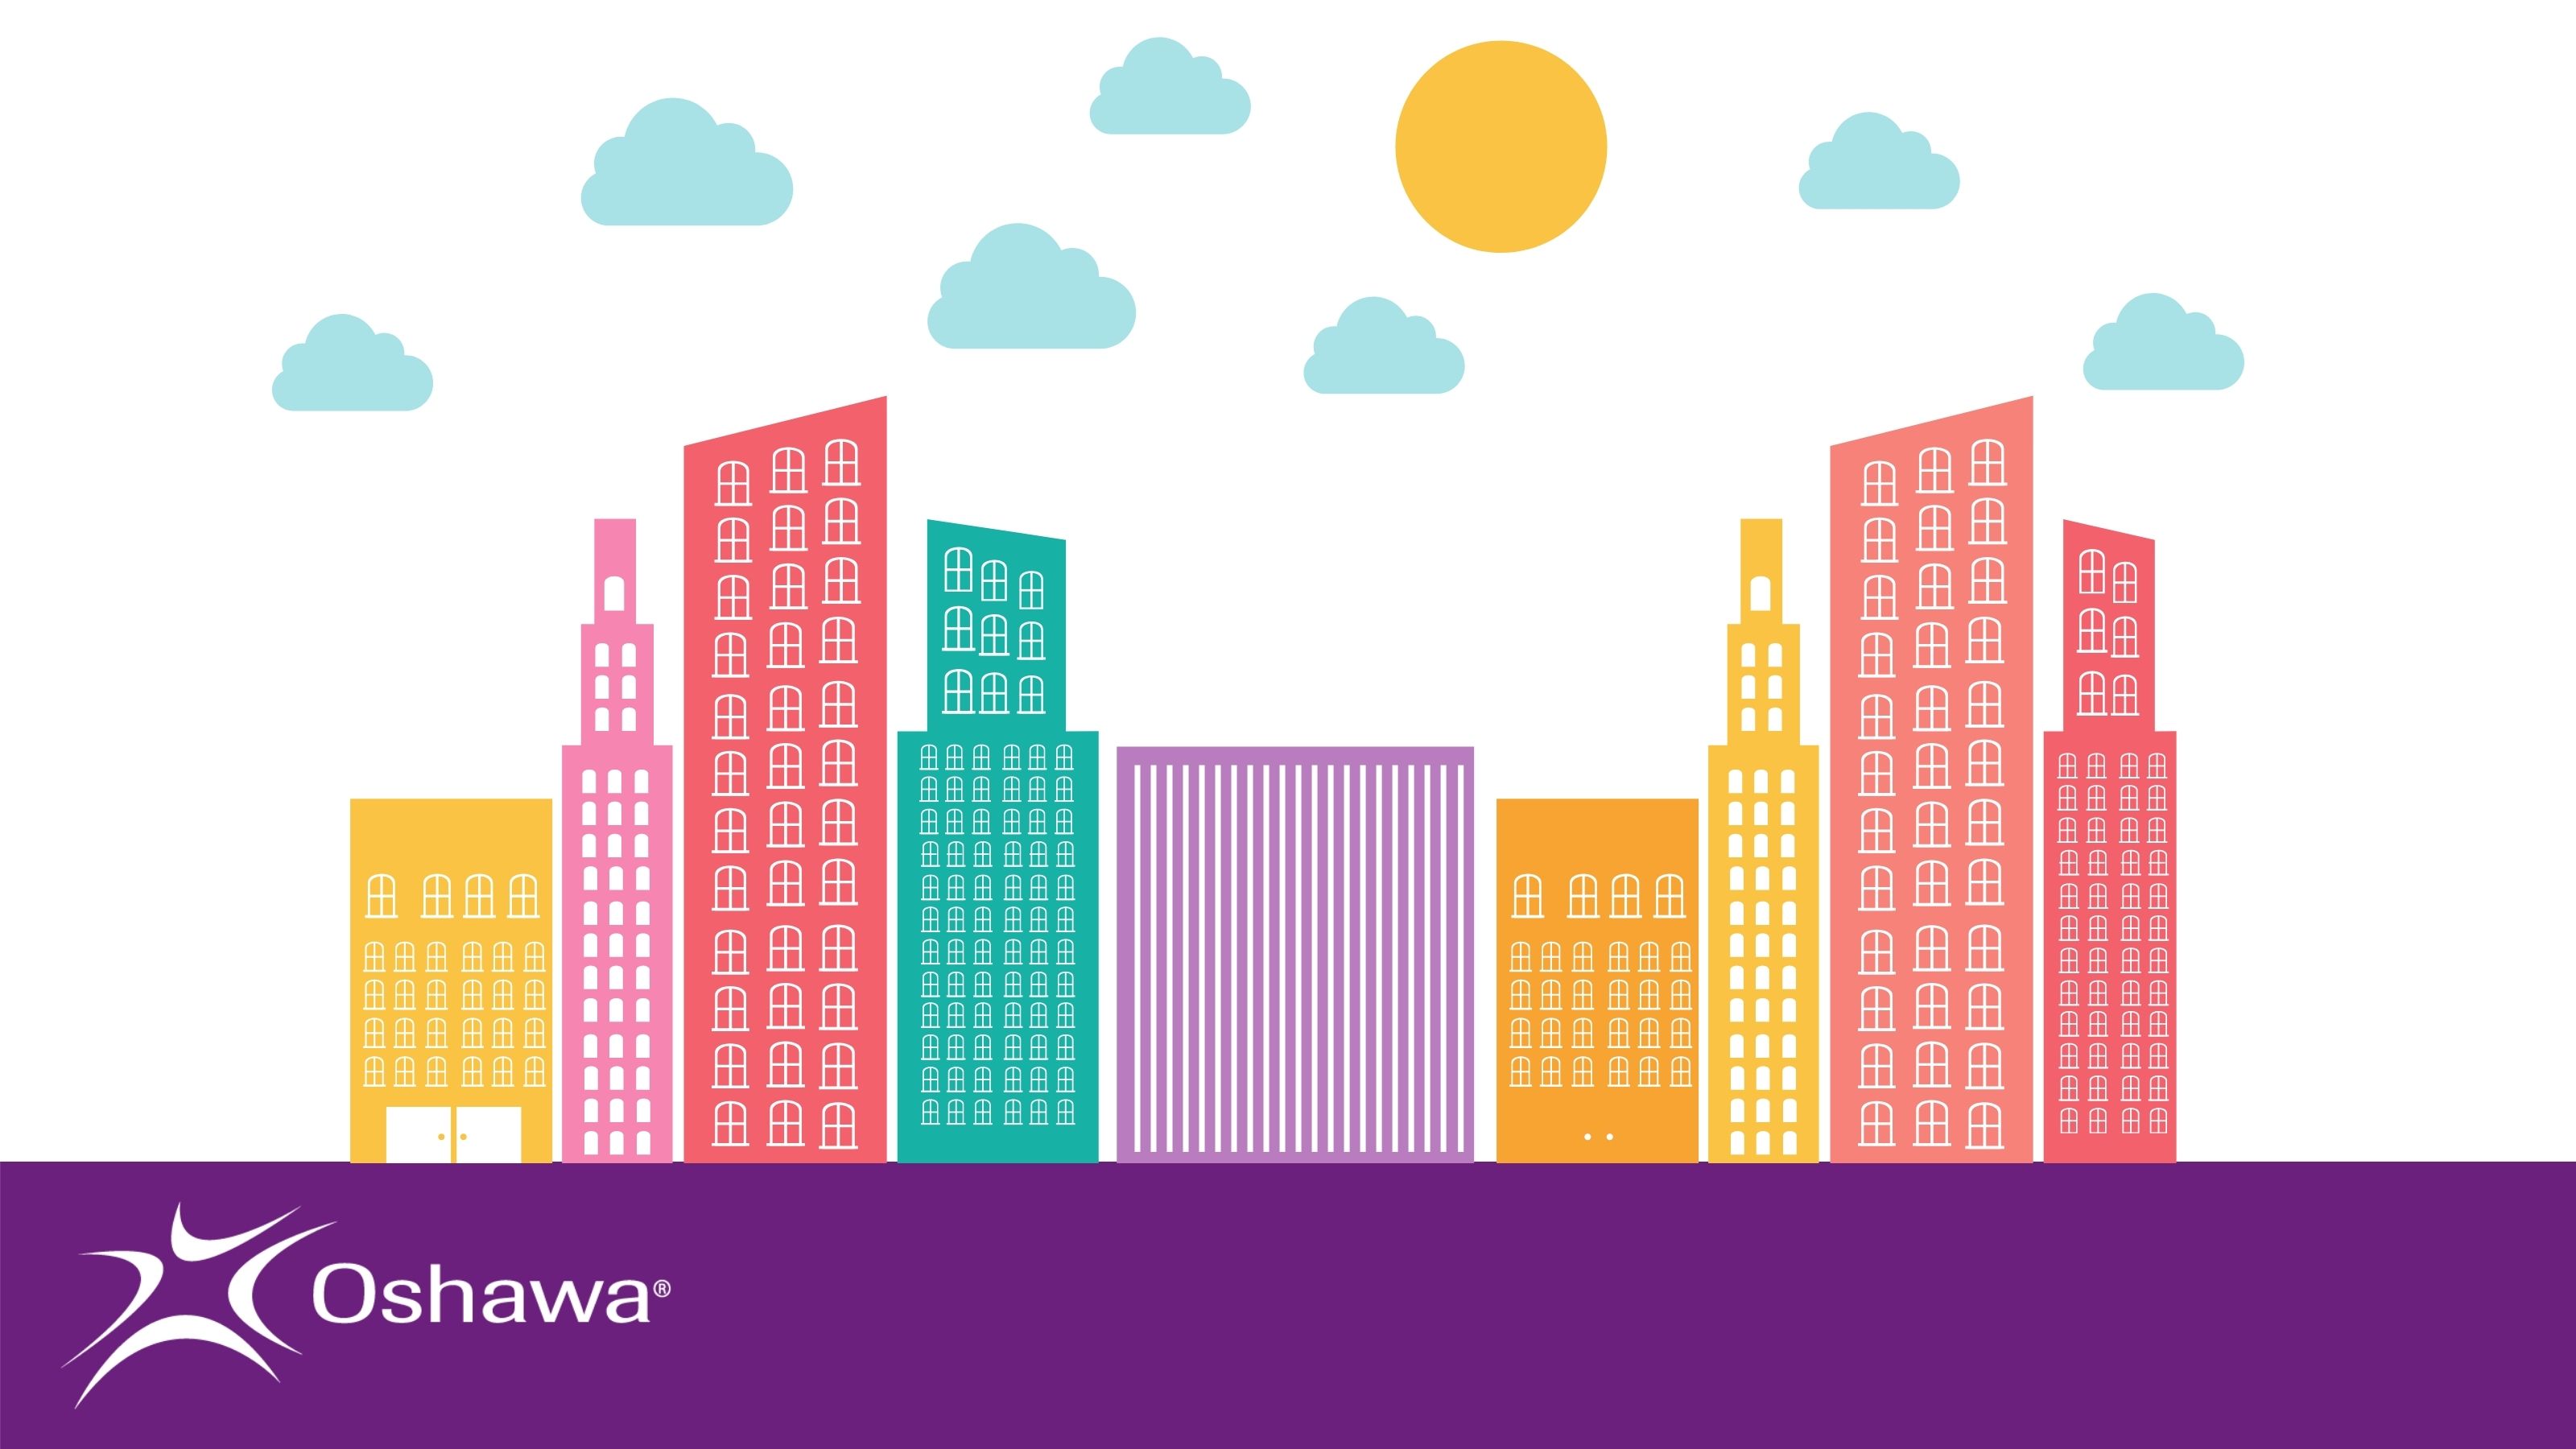 A graphic of a City skyline. The City of Oshawa logo appears in the bottom left.